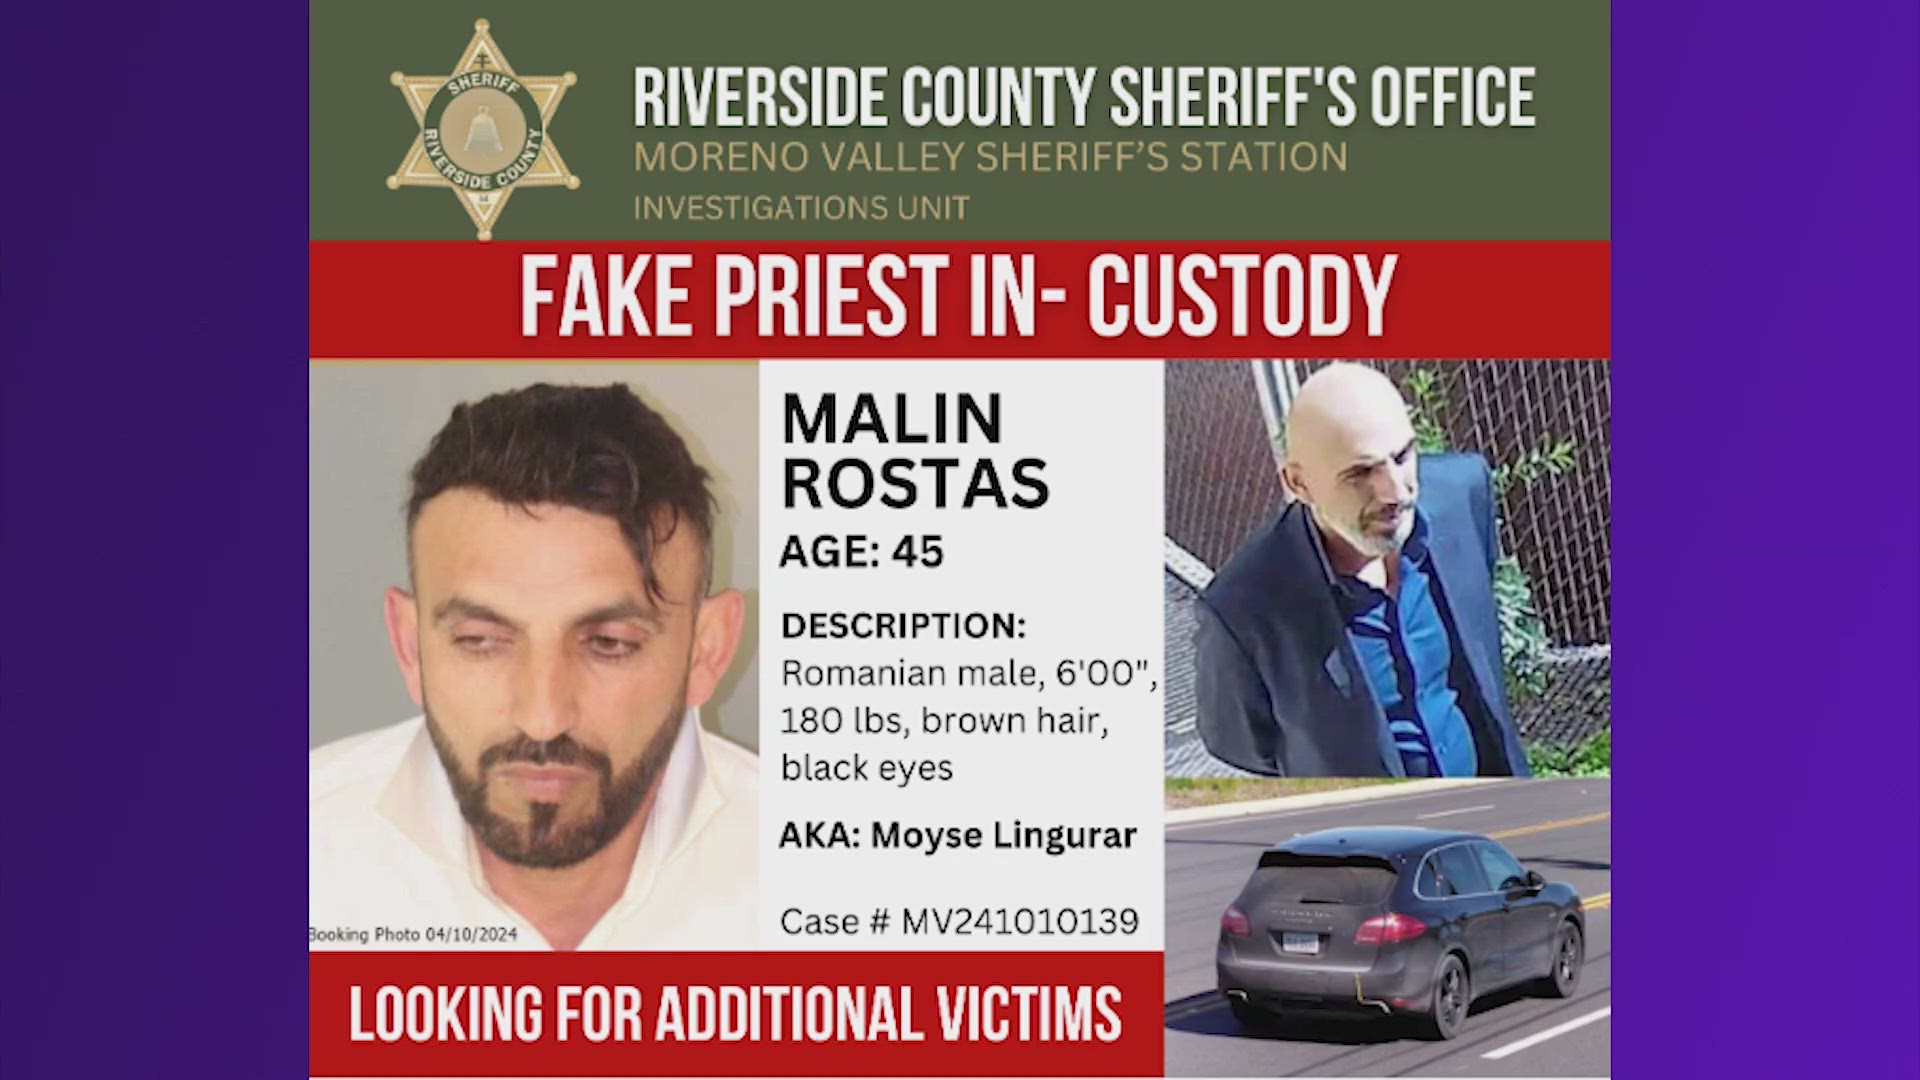 Malin Rostas was arrested in California after trying to burglarize a church, officials said. He's also believed to have stolen from a Houston-area church last year.